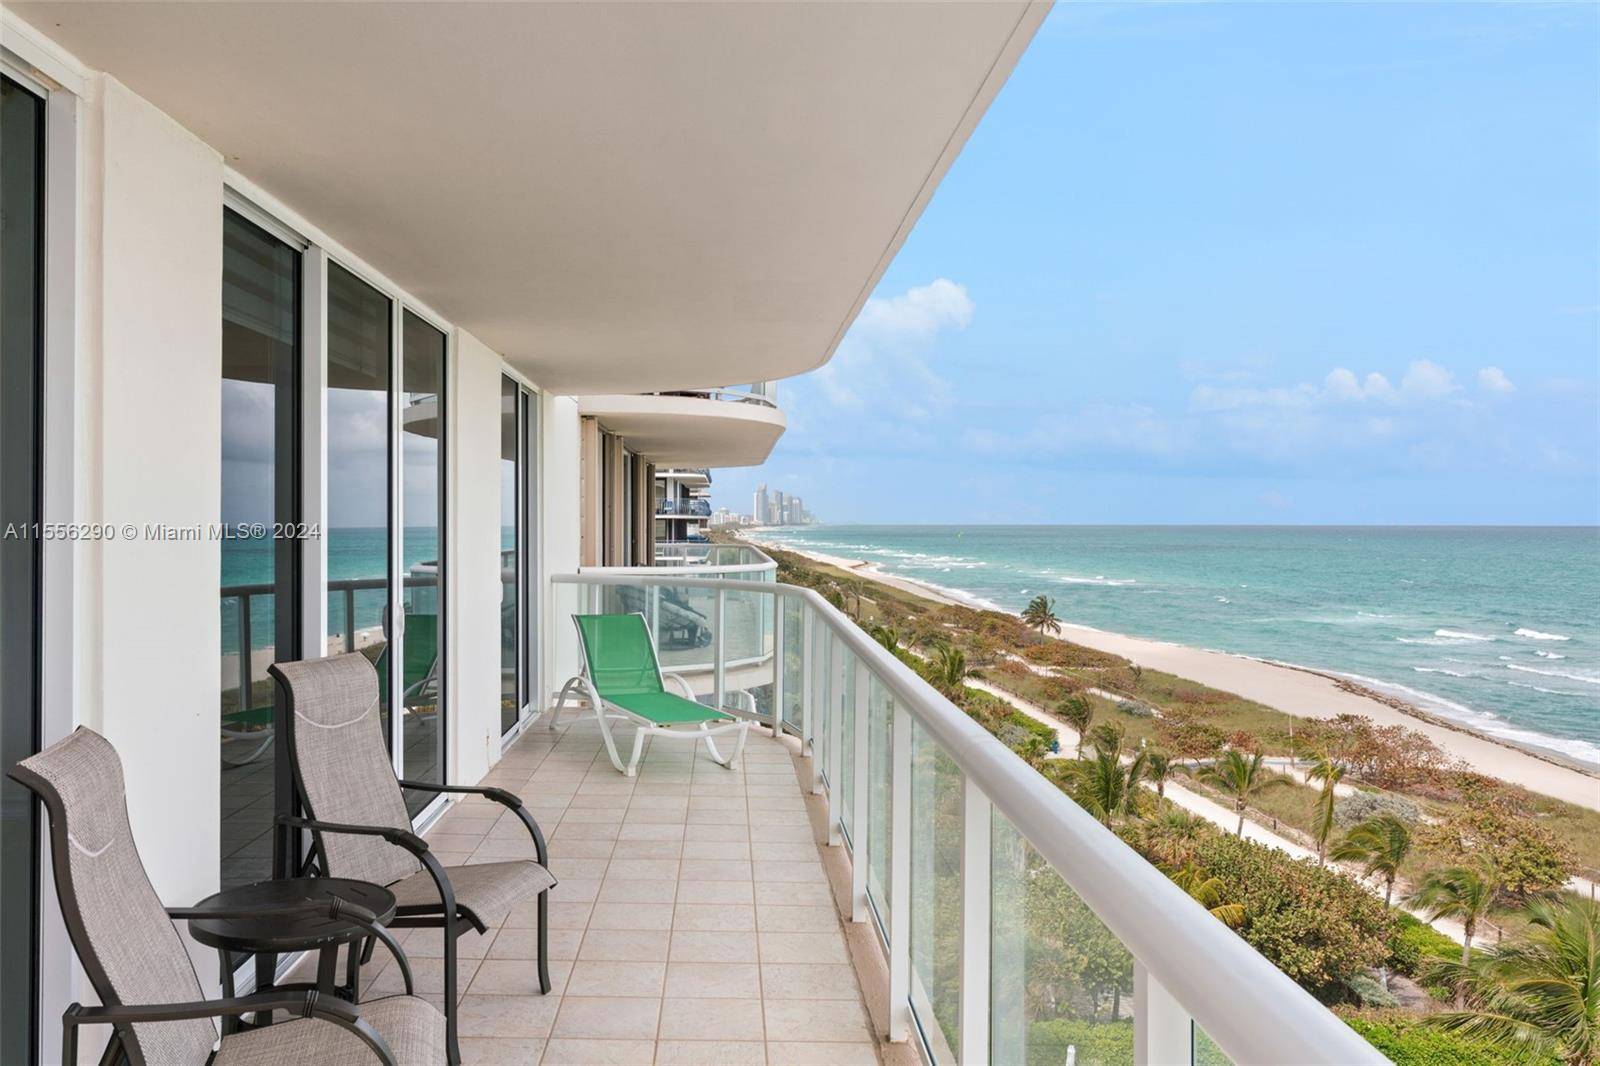 Breathtaking Direct oceanview in this completely remodeled 3 bedroom 2 1 2 bathroom with 2260 sq.